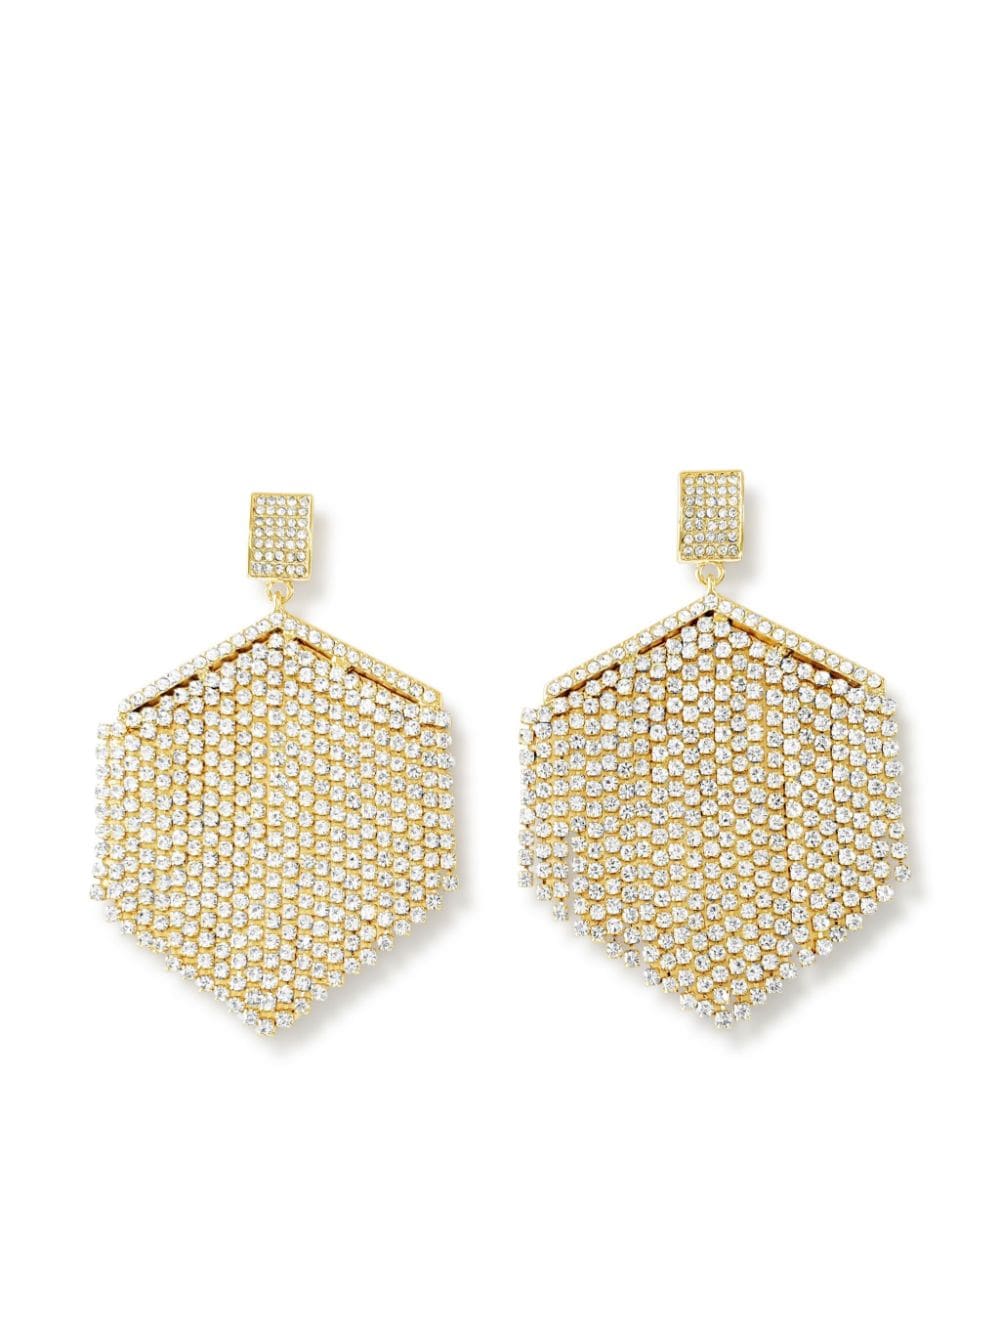 Hzmer Jewelry crystal-embellished drop earrings - Gold von Hzmer Jewelry